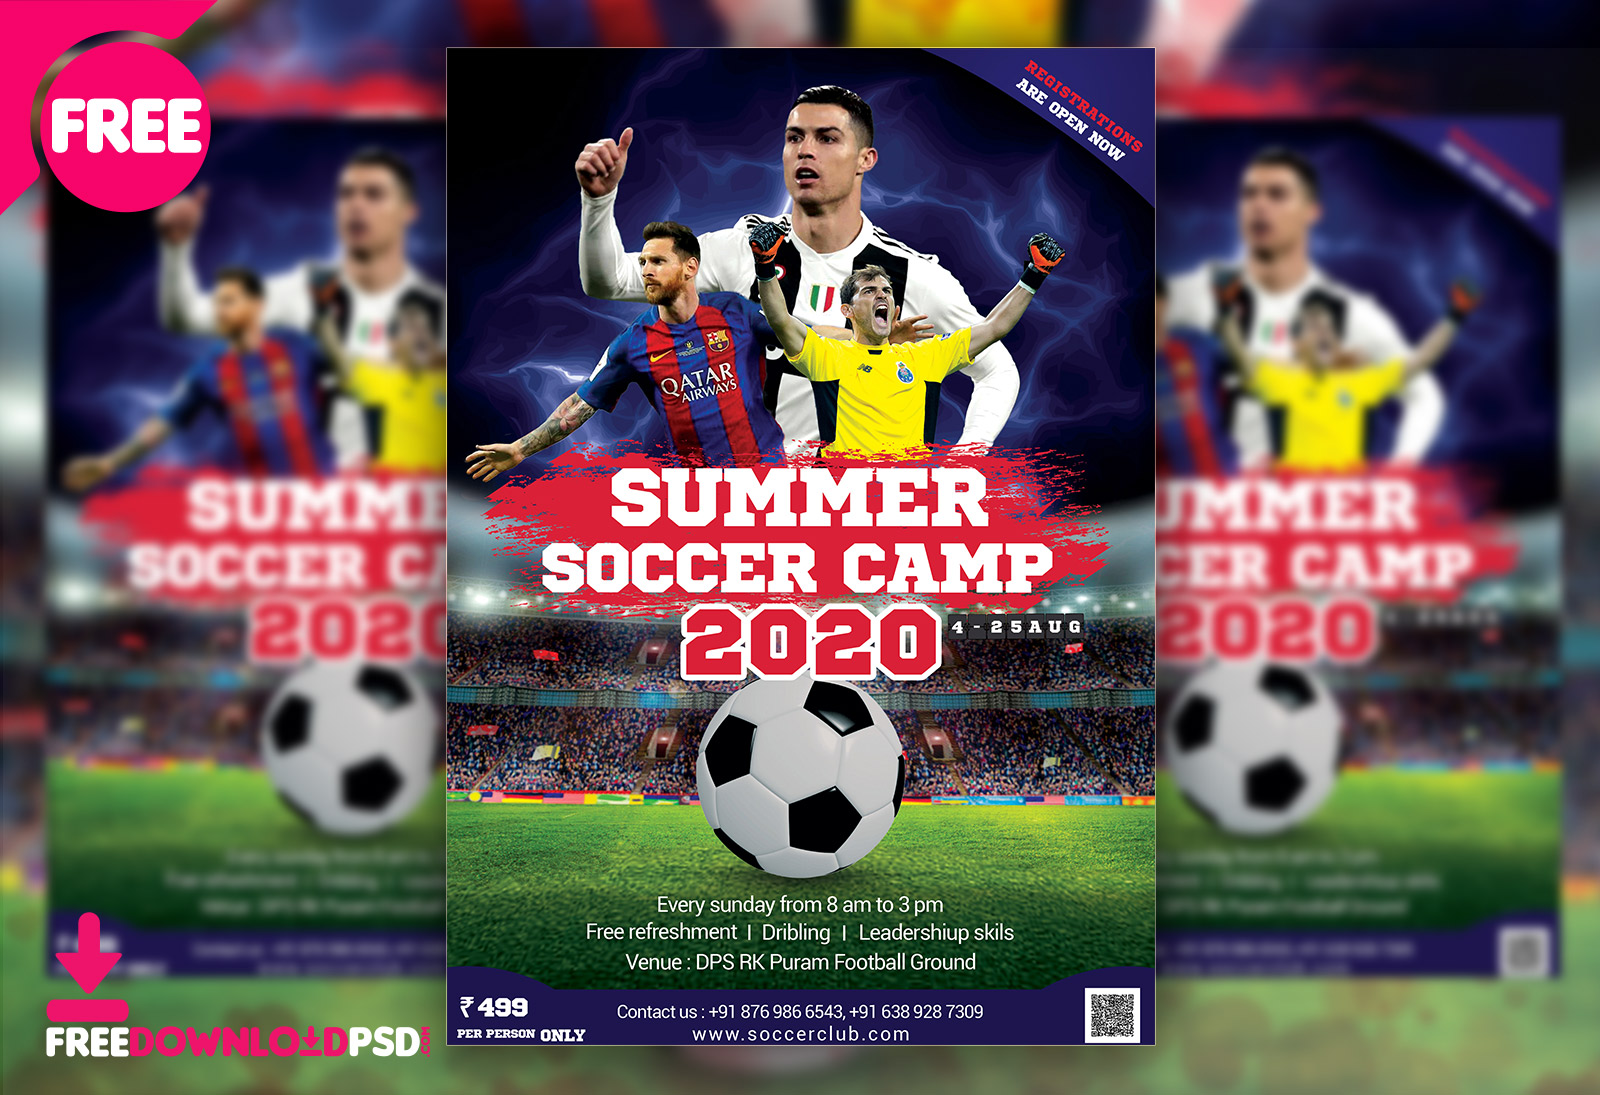 Summer Soccer Camp Flyer Free PSD  FreedownloadPSD.com Intended For Football Camp Flyer Template Free